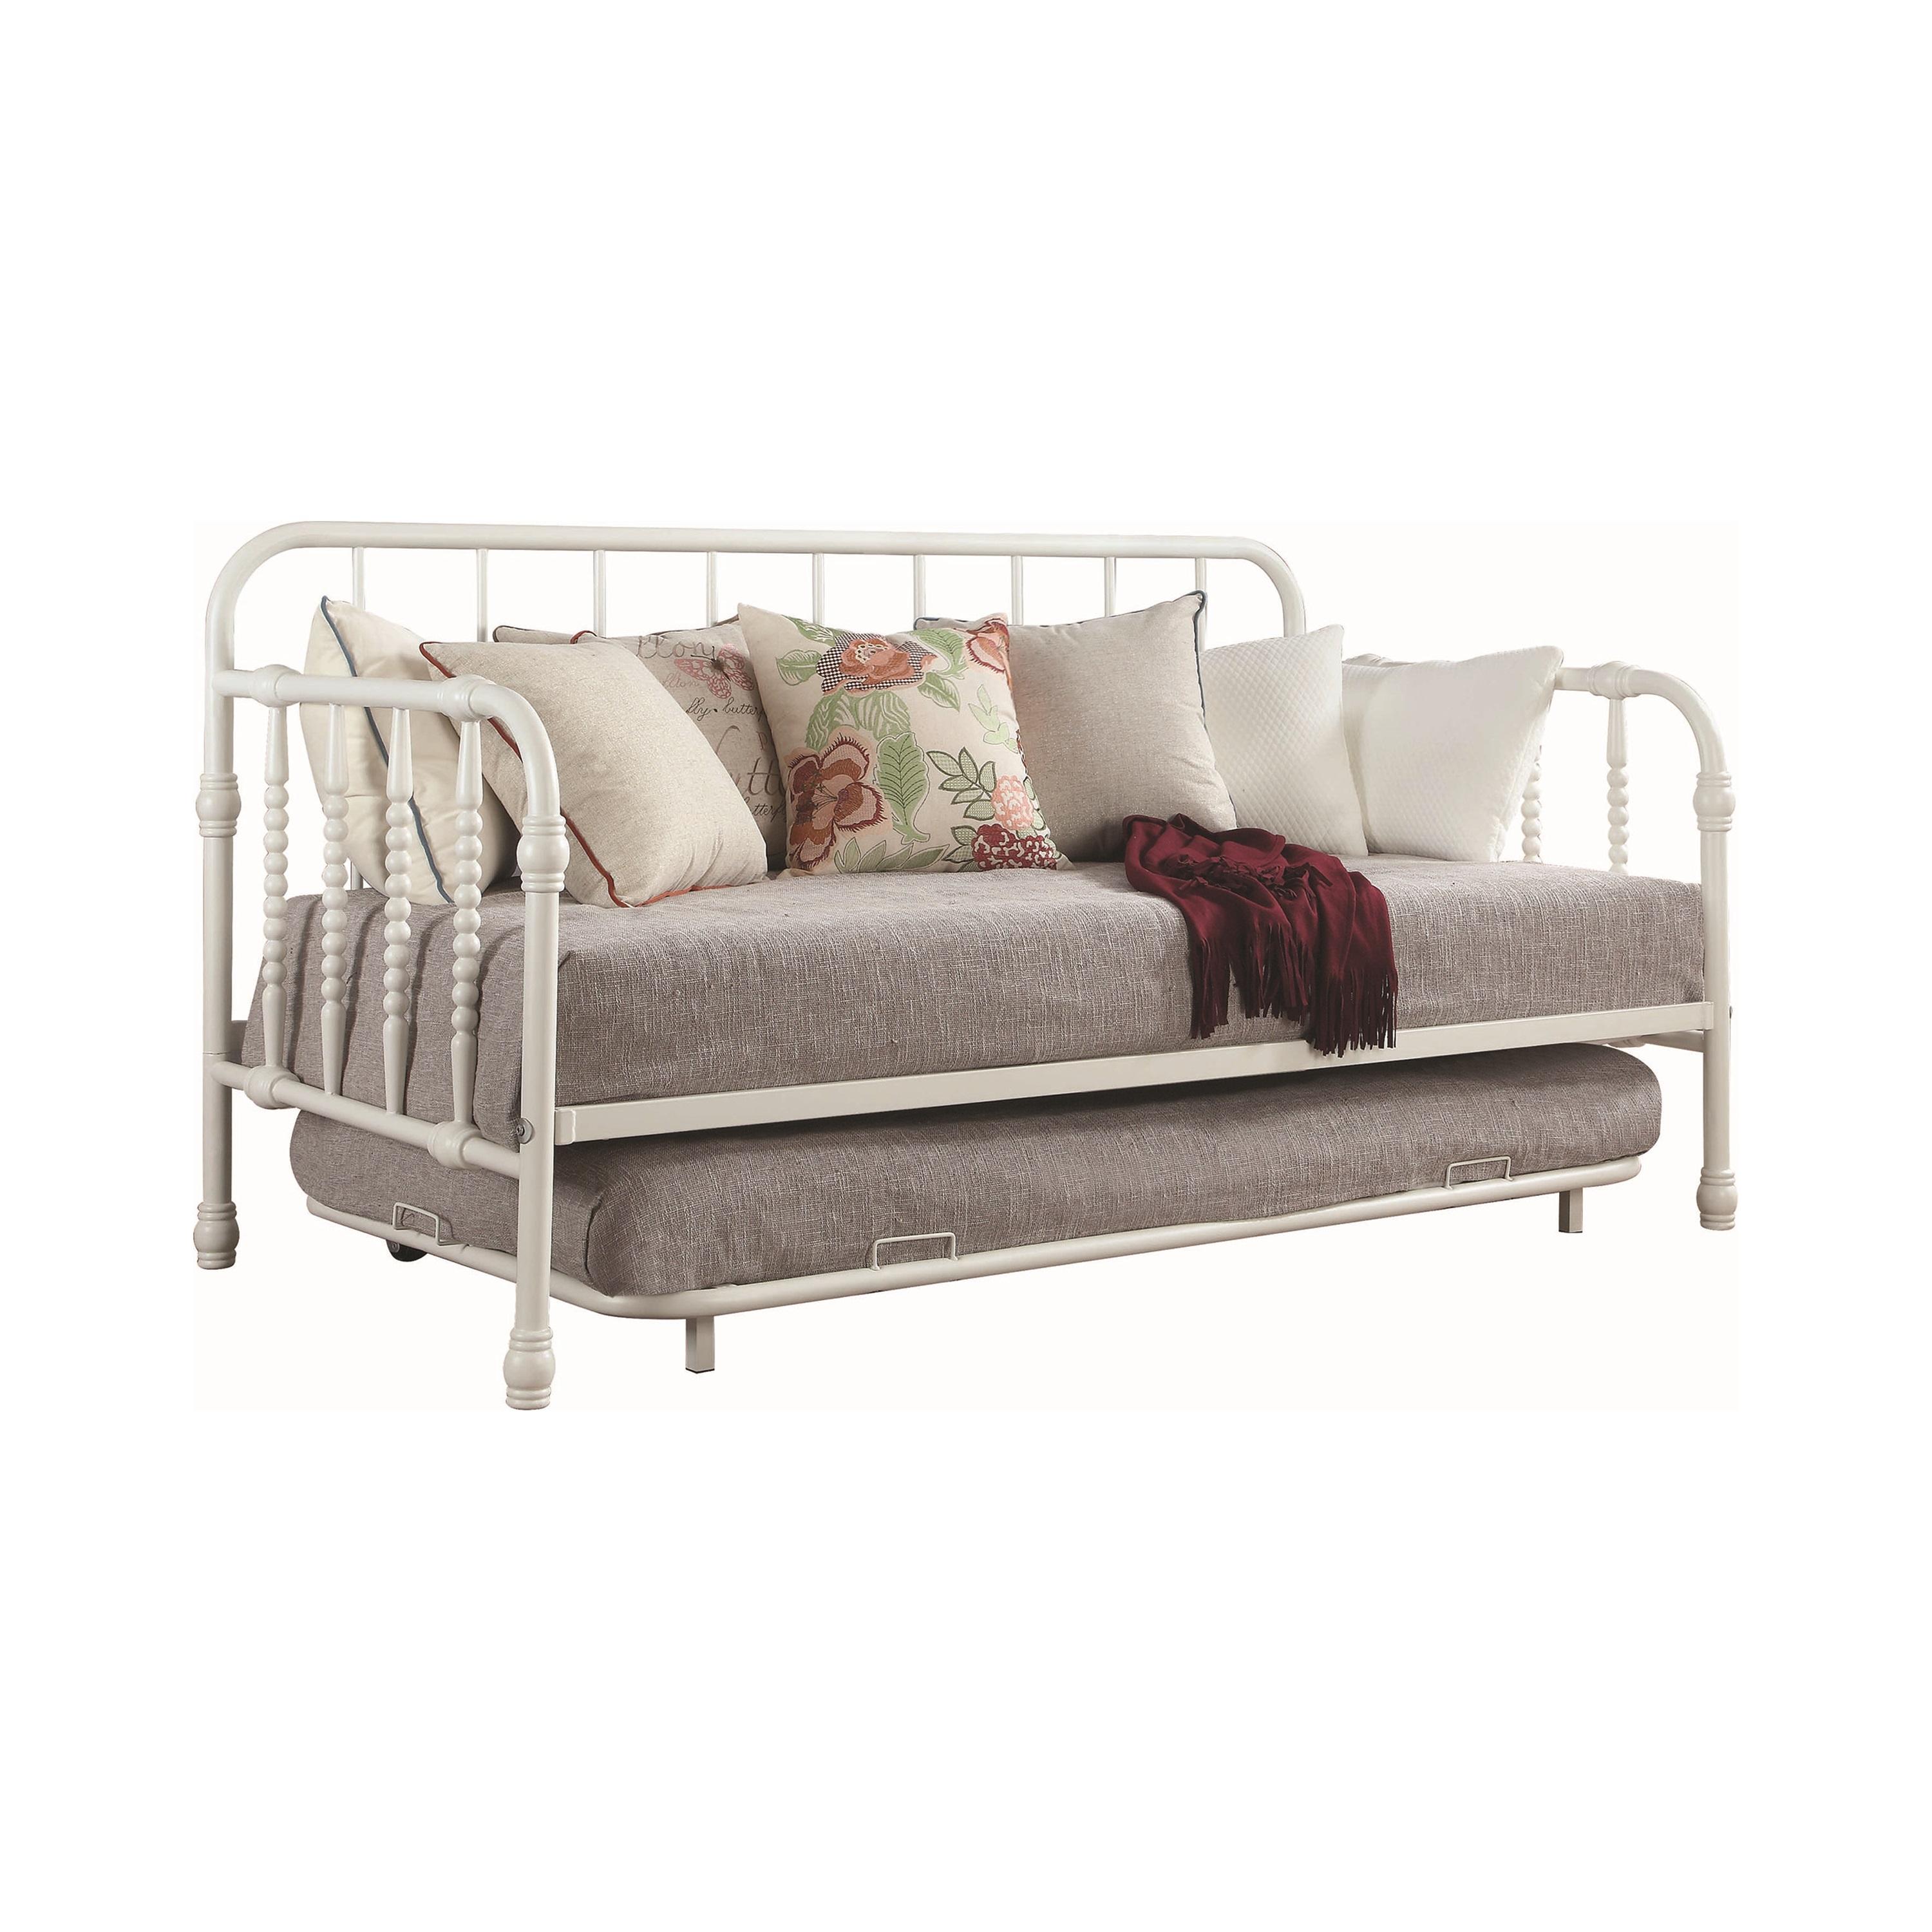 Transitional Daybed w/Trundle 300766 300766 in White 